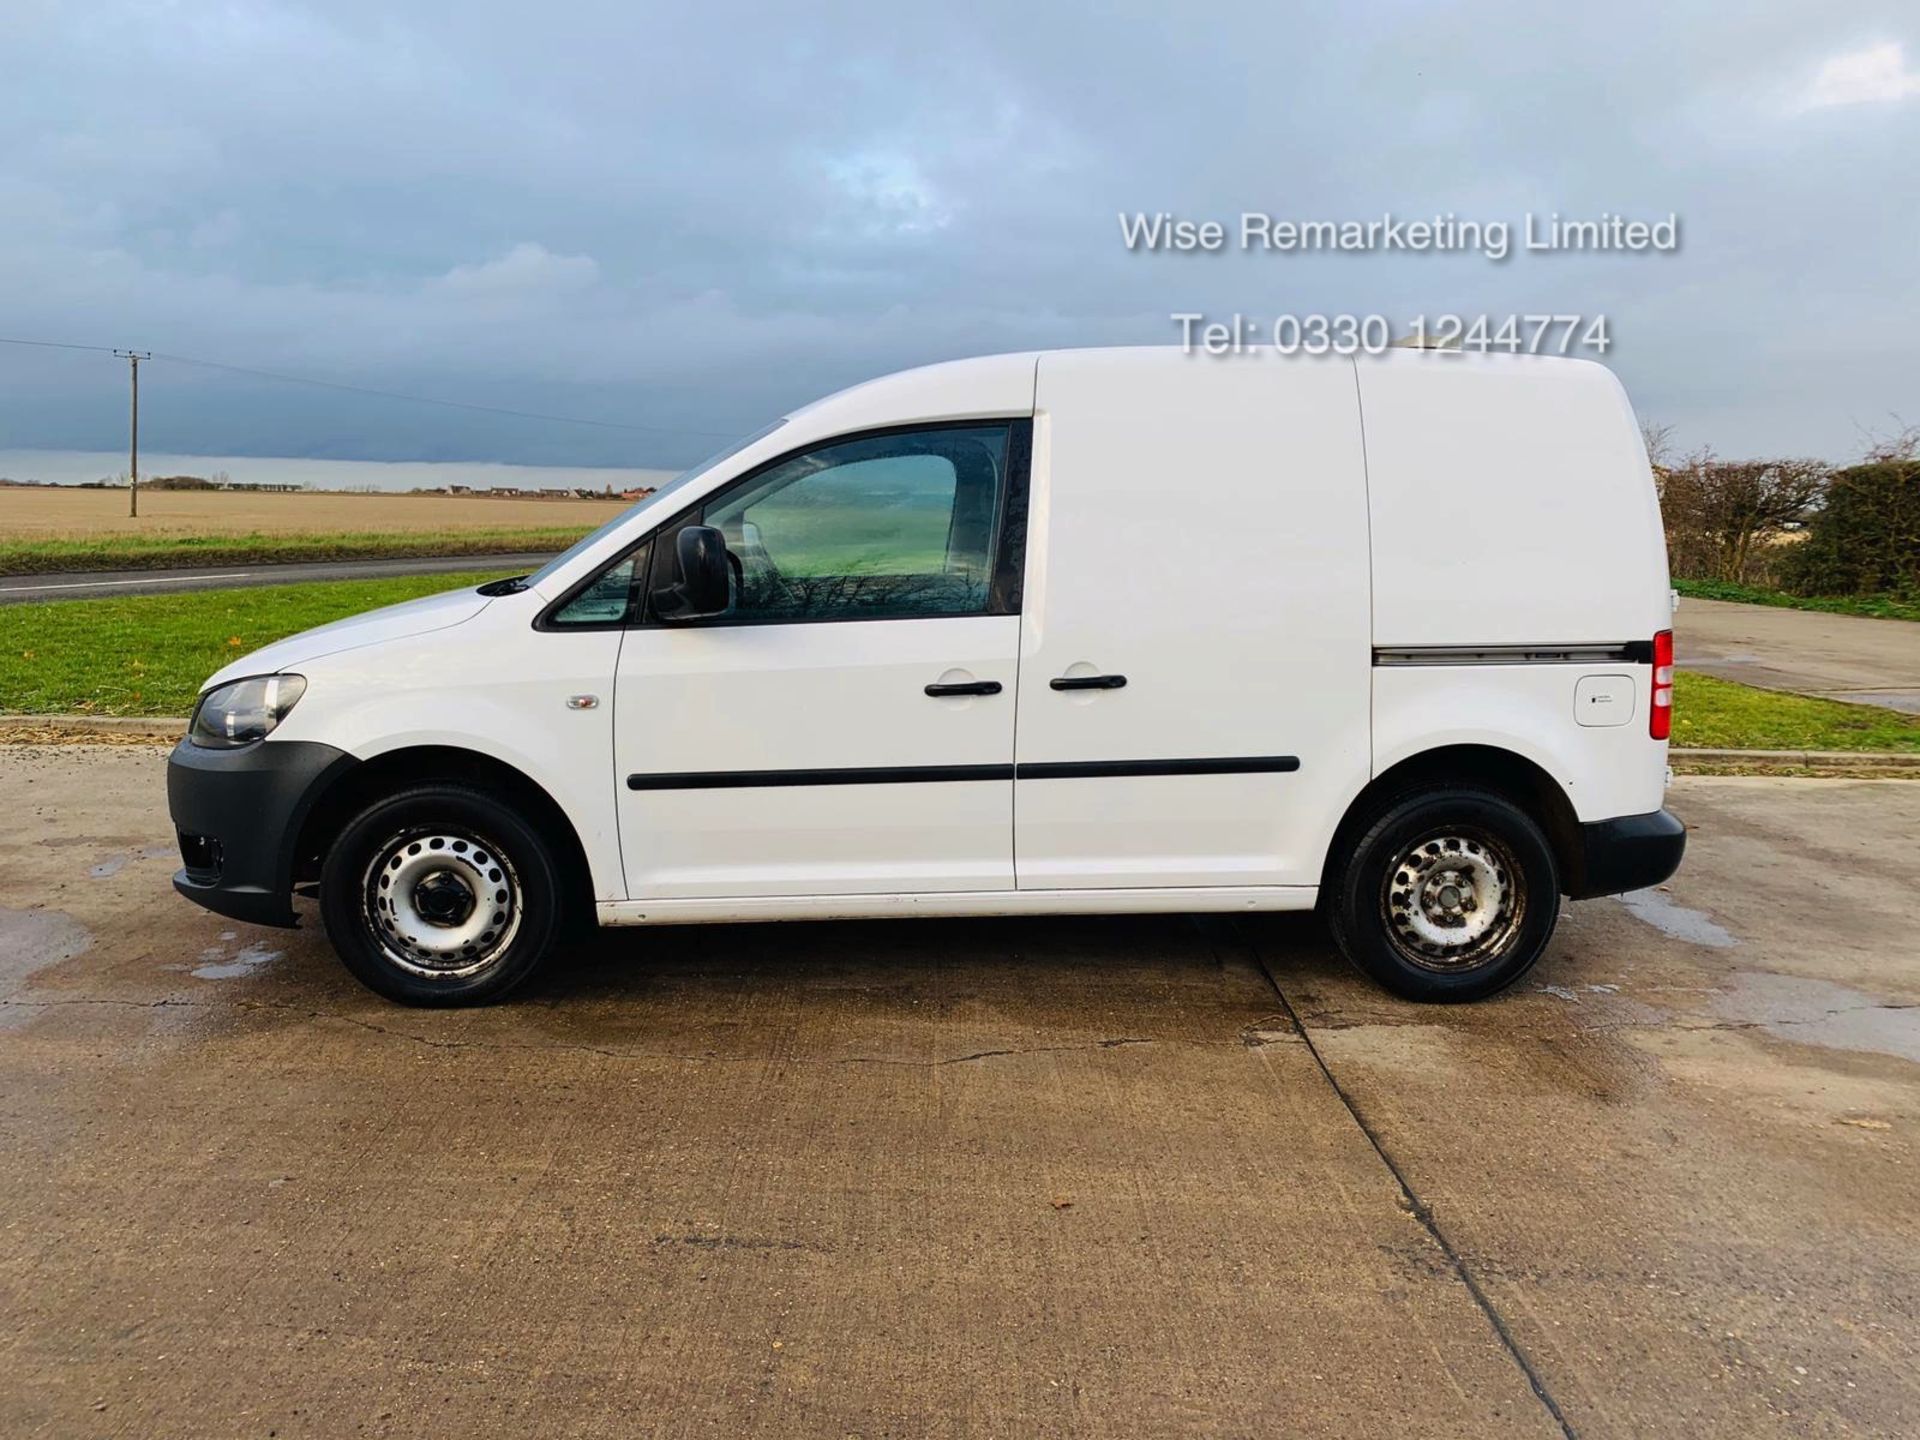 Volkswagen Caddy C20 1.6 TDI - 2012 Model - 1 Keeper From New - Side Loading Door - Ply Lined - Image 7 of 16